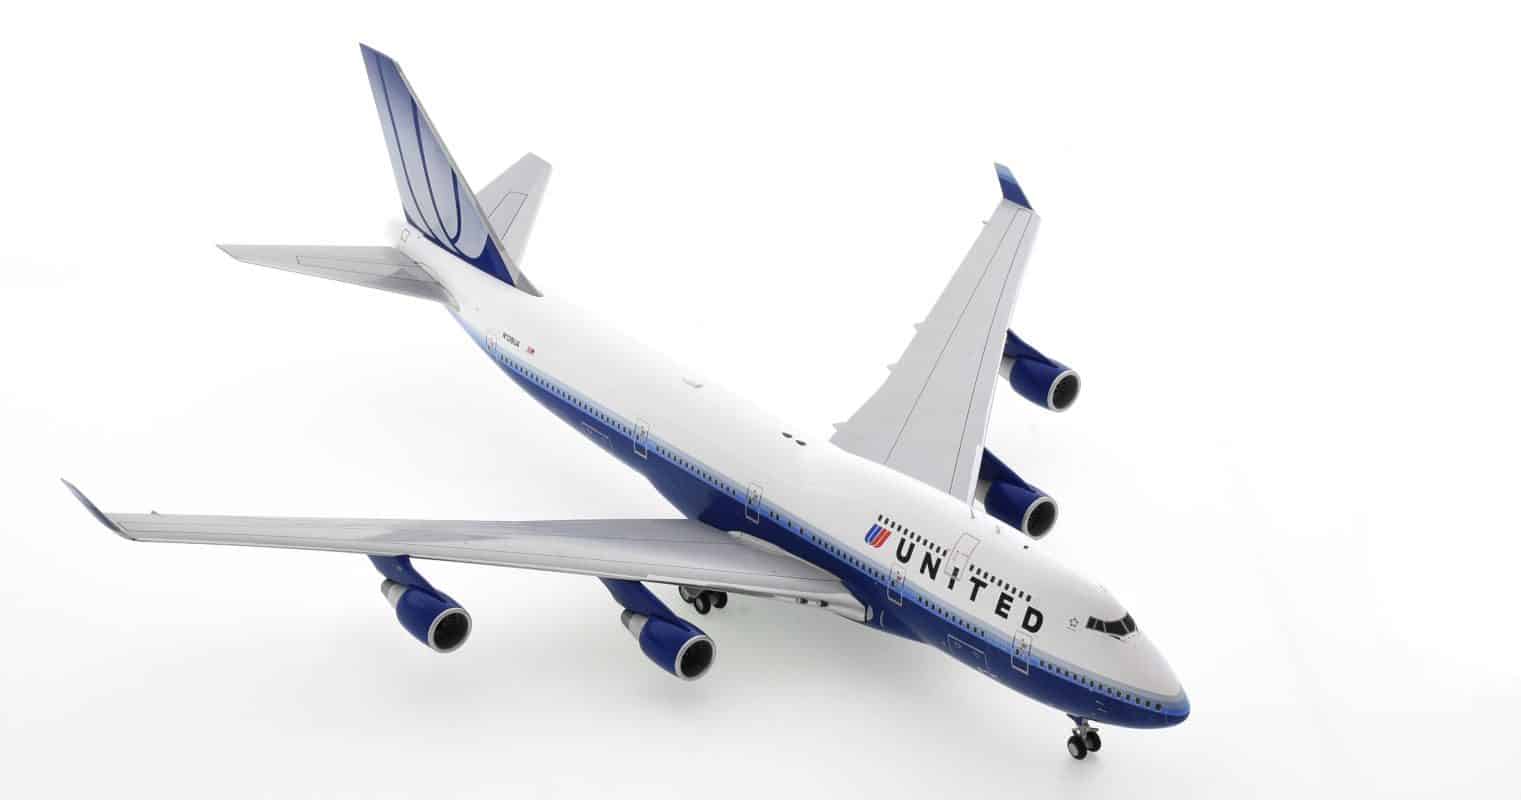 Front starboard side view of JC2UAL267 / XX2267 - 1/200 scale diecast model of the Boeing 747-400 of registration N128UA in United Airlines livery, circa the 2000s.